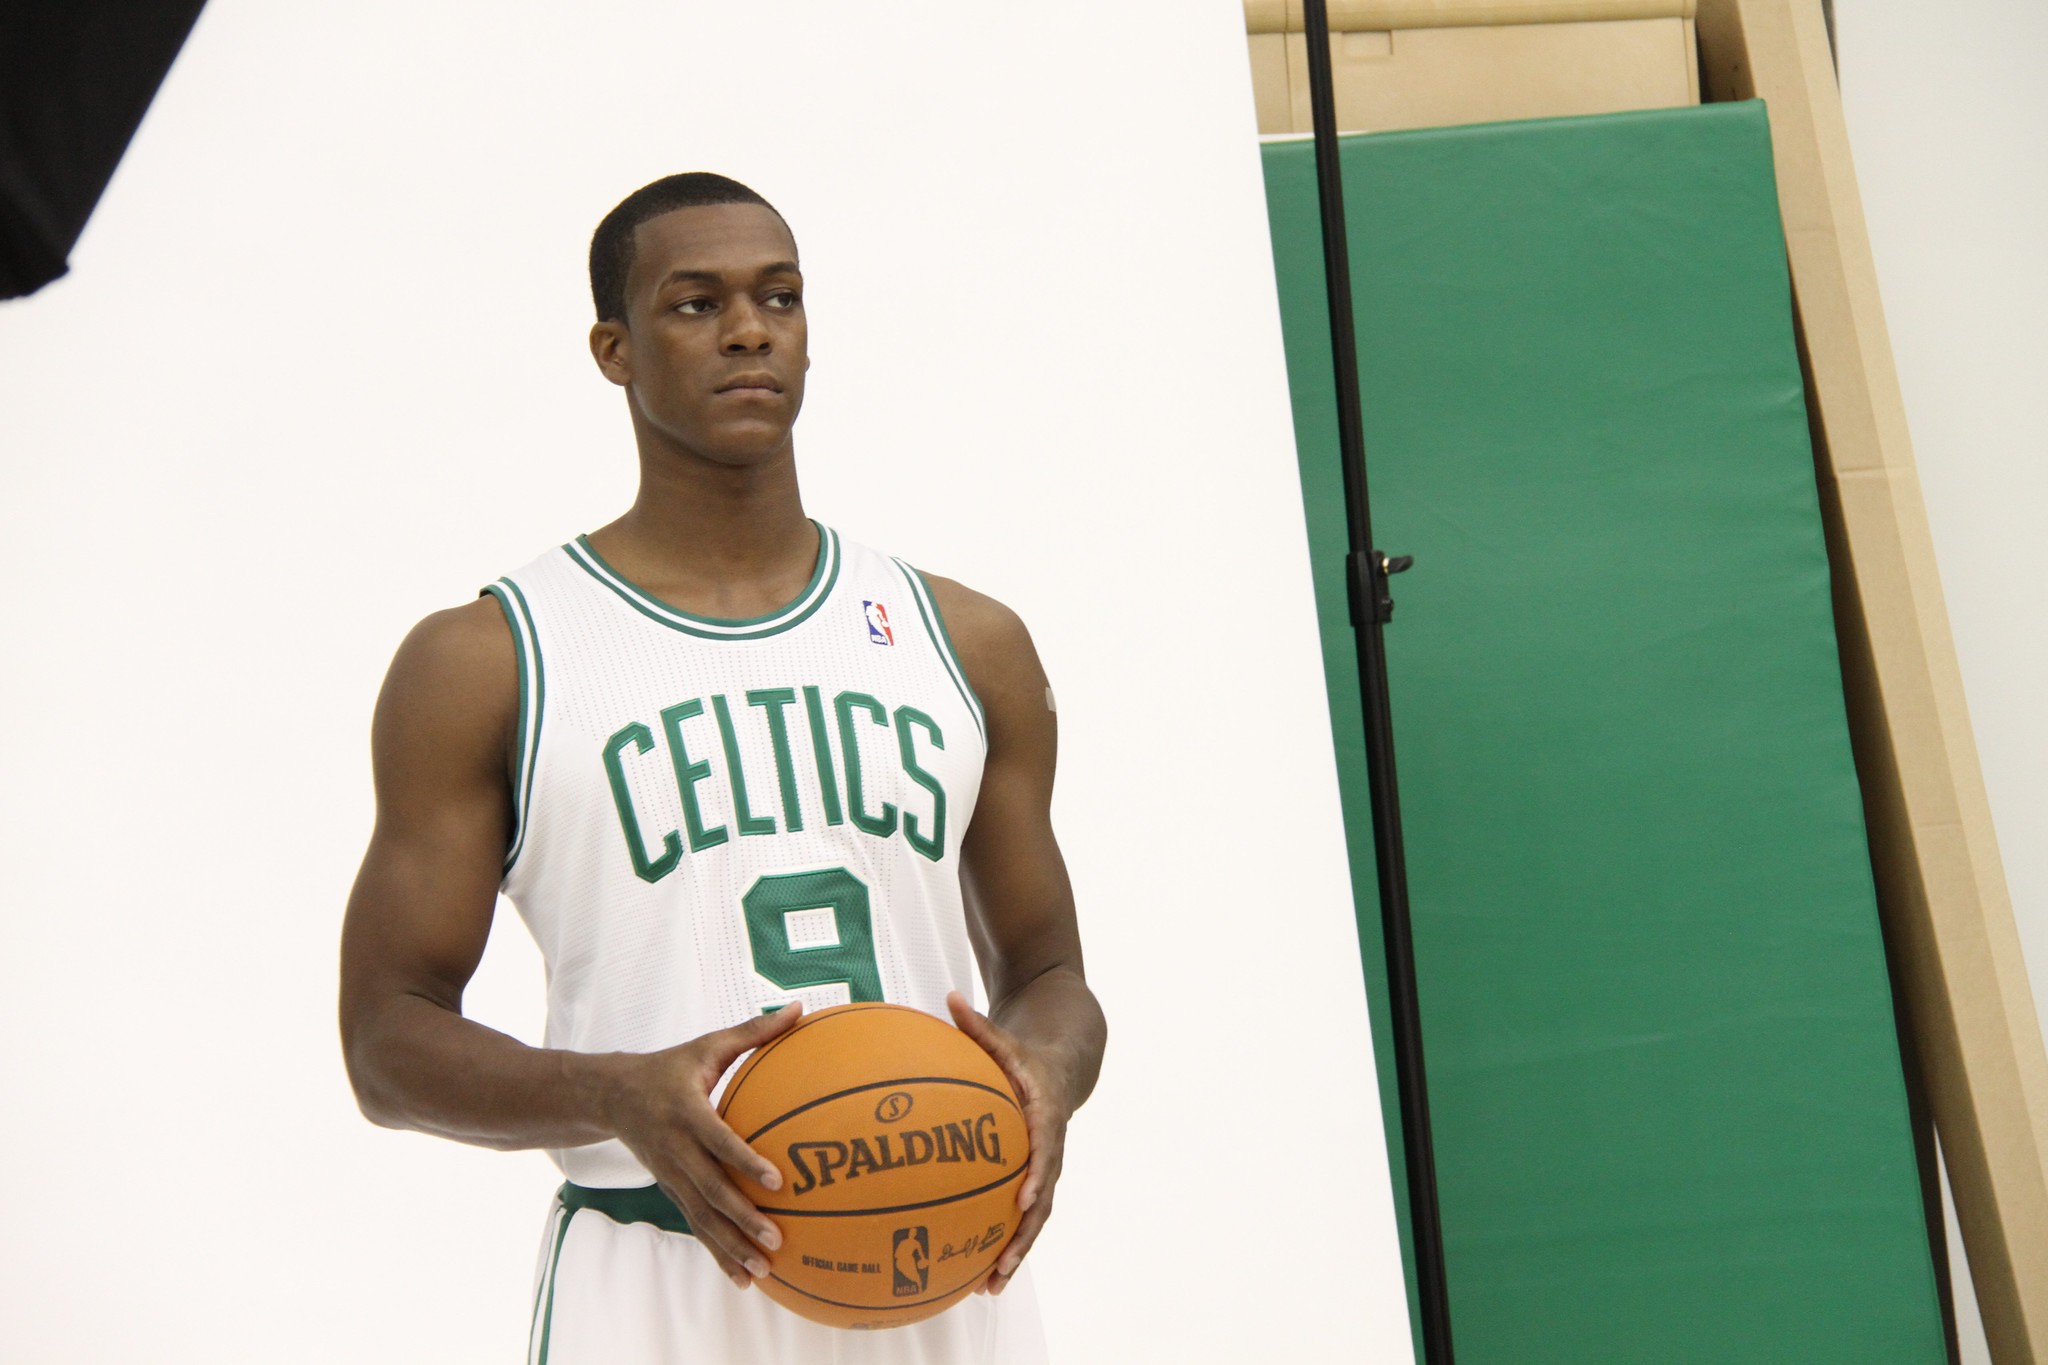 "Media Day is not a favorite for Rondo" by DGA Productions is licensed under CC BY 2.0.